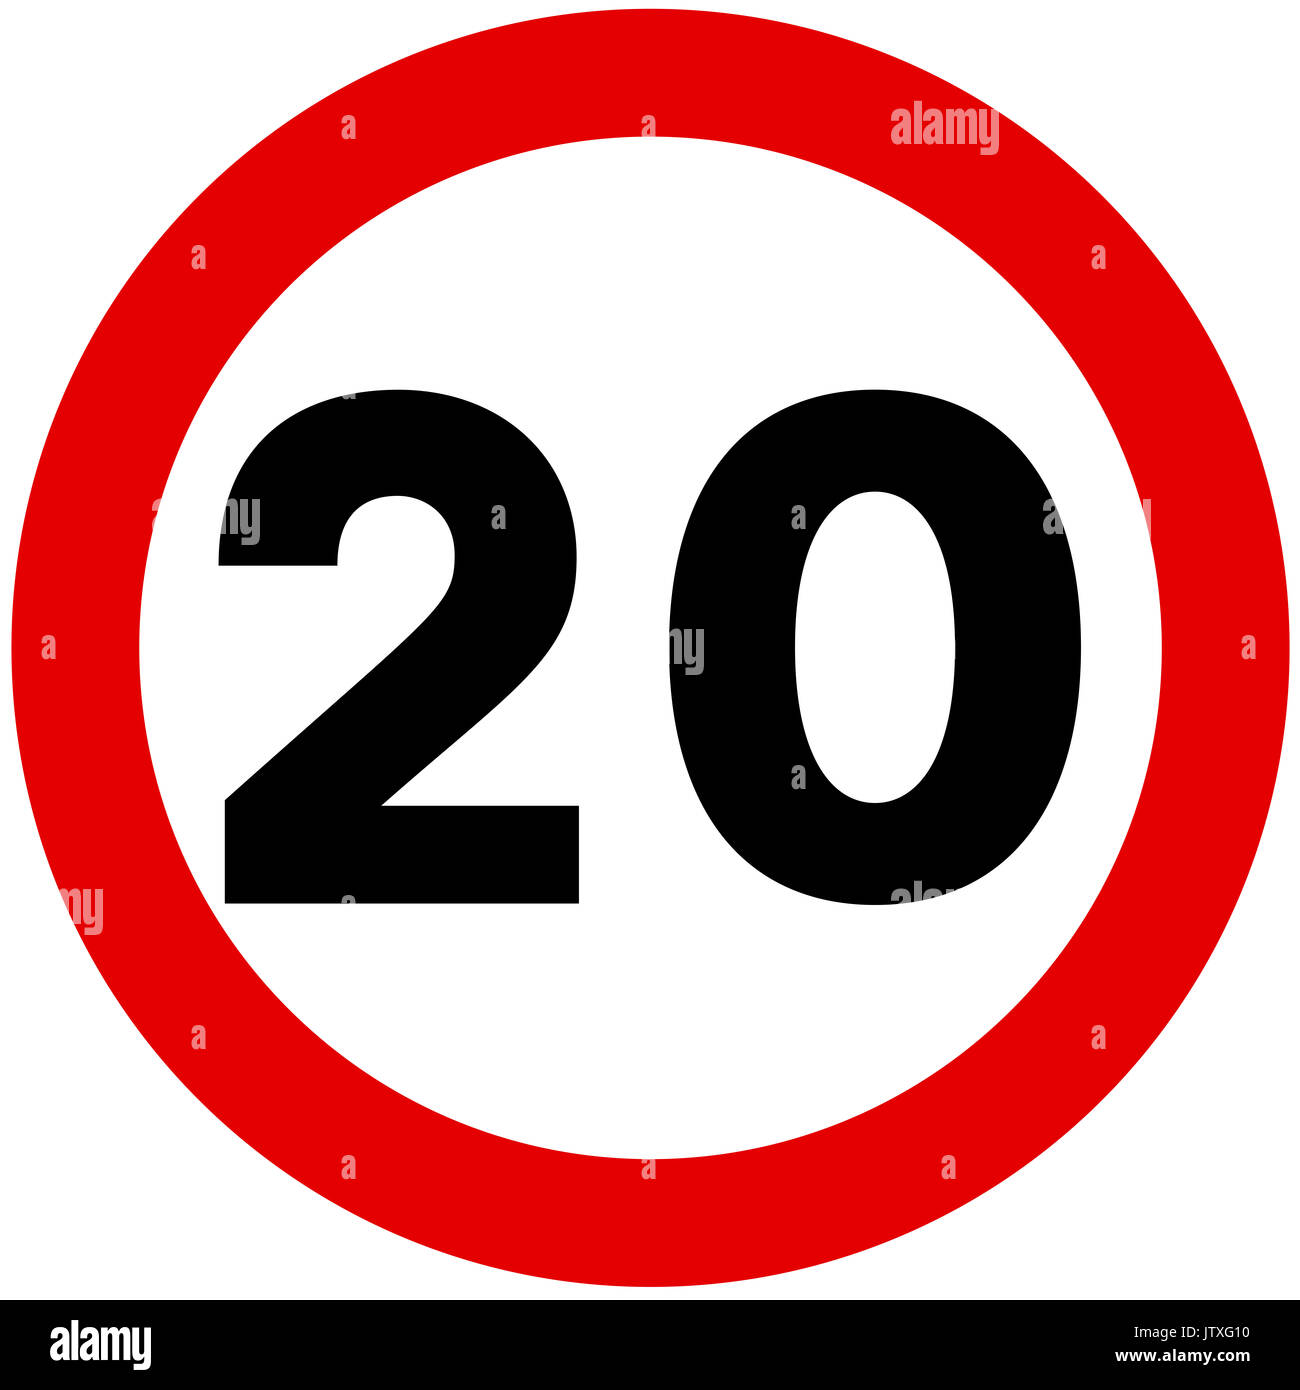 20 mph maximum speed road sign on white background Stock Photo